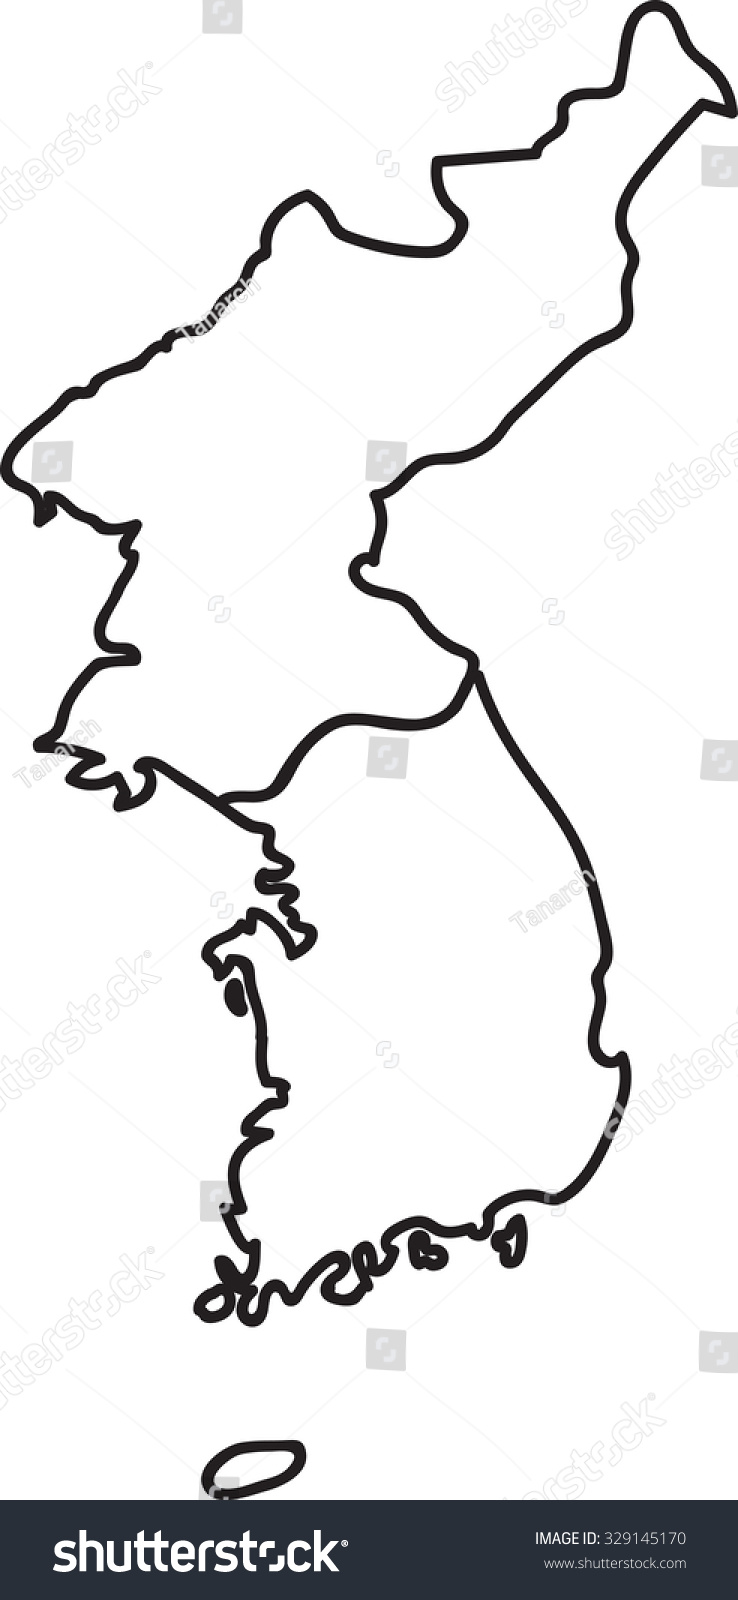 Doodle Freehand Outline Sketch Of North Korea And South Korea Map My